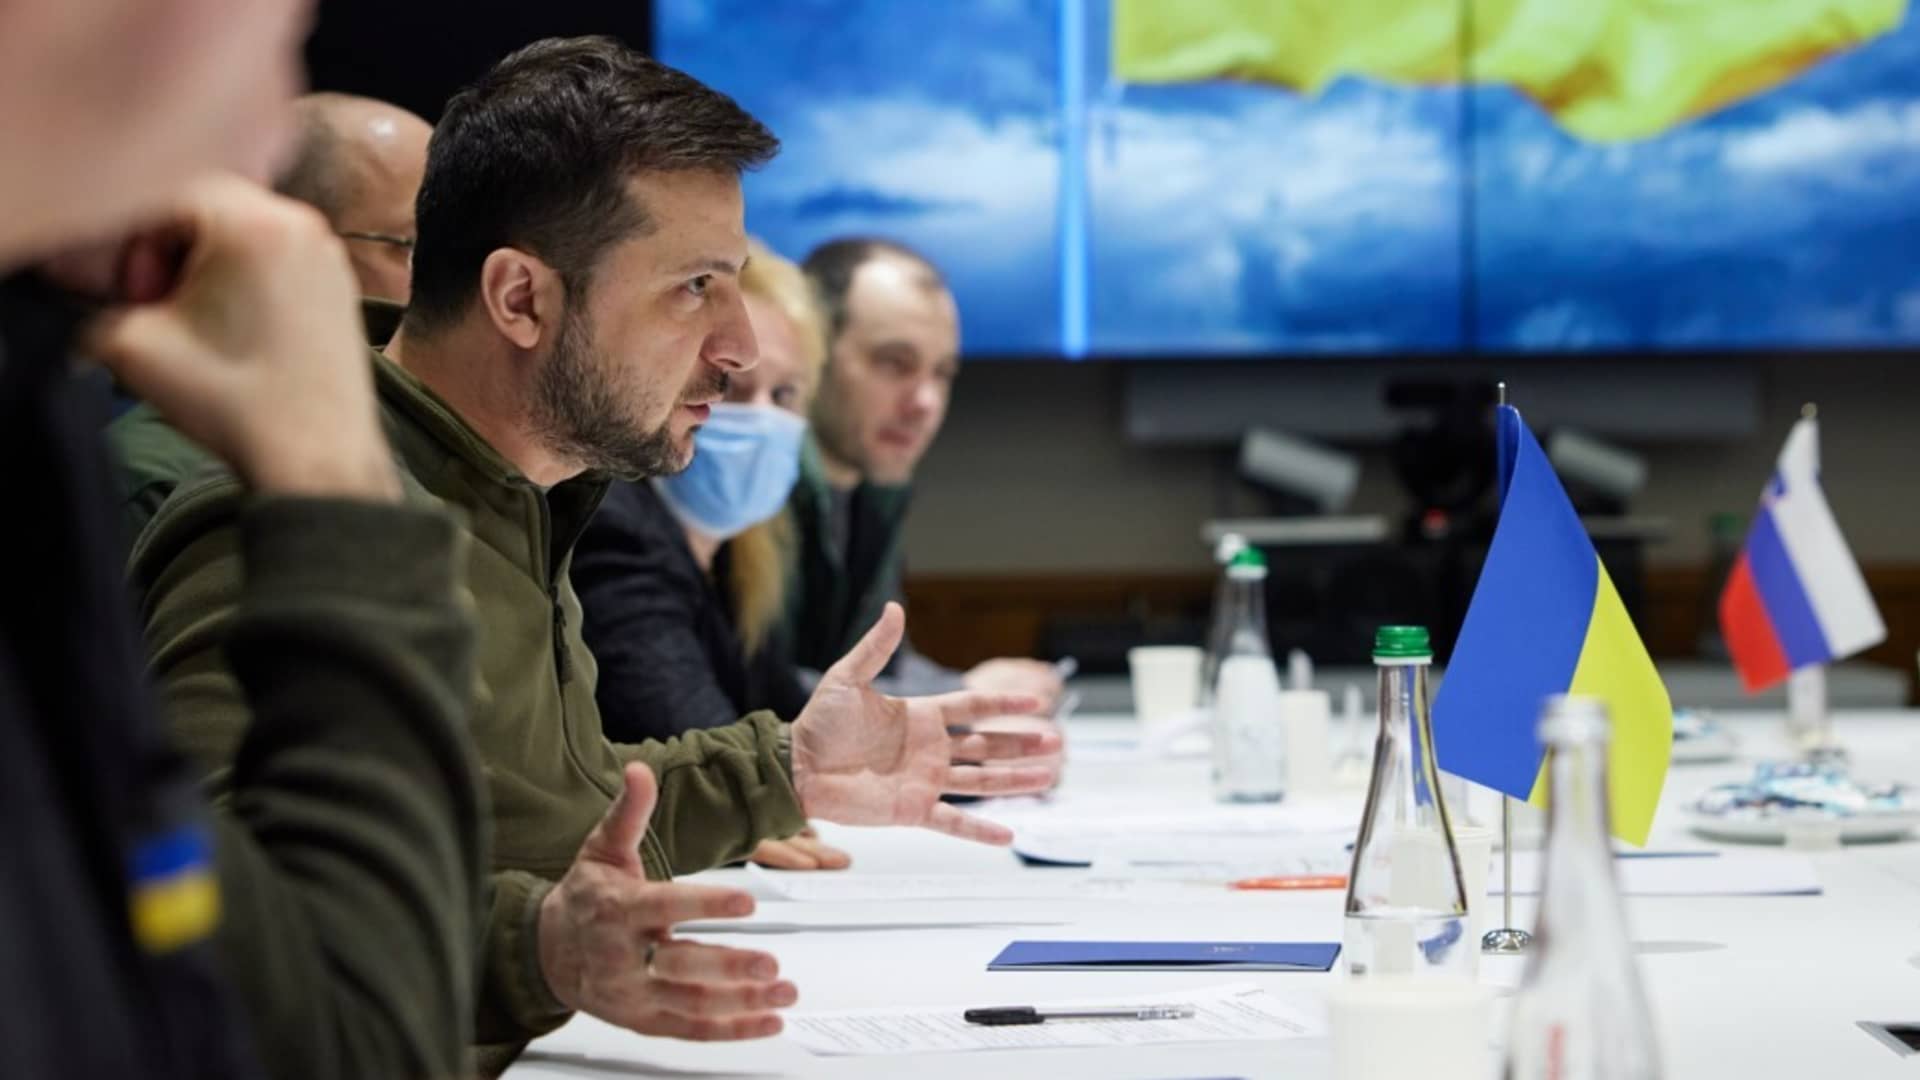 Ukrainian President Volodymyr Zelenskyy meets Prime Minister of the Czech Republic, Petr Fiala, Prime Minister of Poland, Mateusz Morawieckiand Prime Minister of Slovenia, Janez Jansaduring their visit in Kyiv on behalf of EU Council, on March 16, 2022.